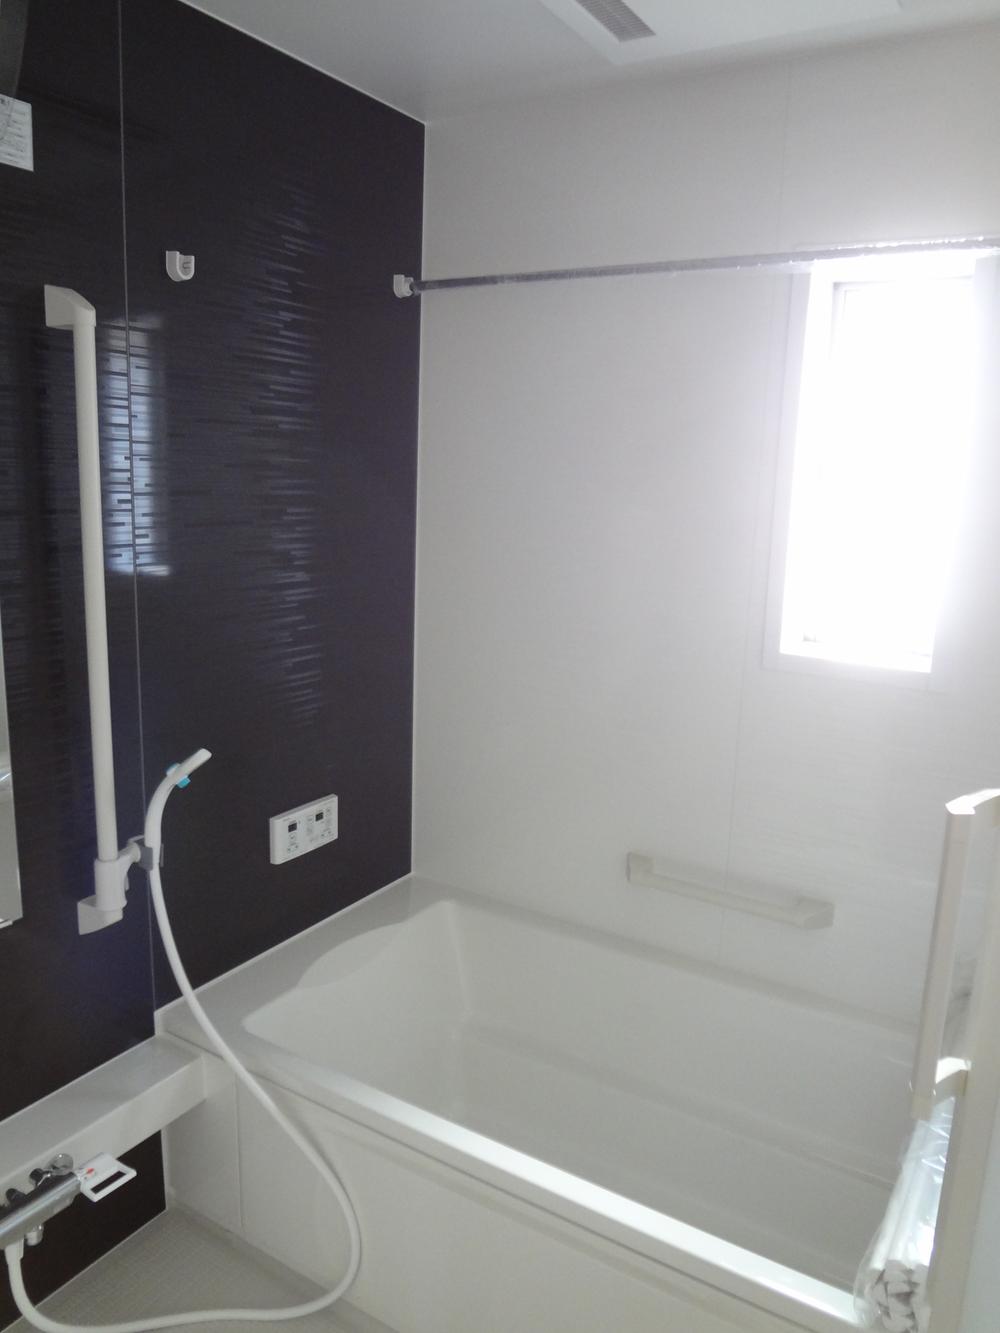 Same specifications photo (bathroom). Bathroom construction example photo  With bathroom ventilation drying function